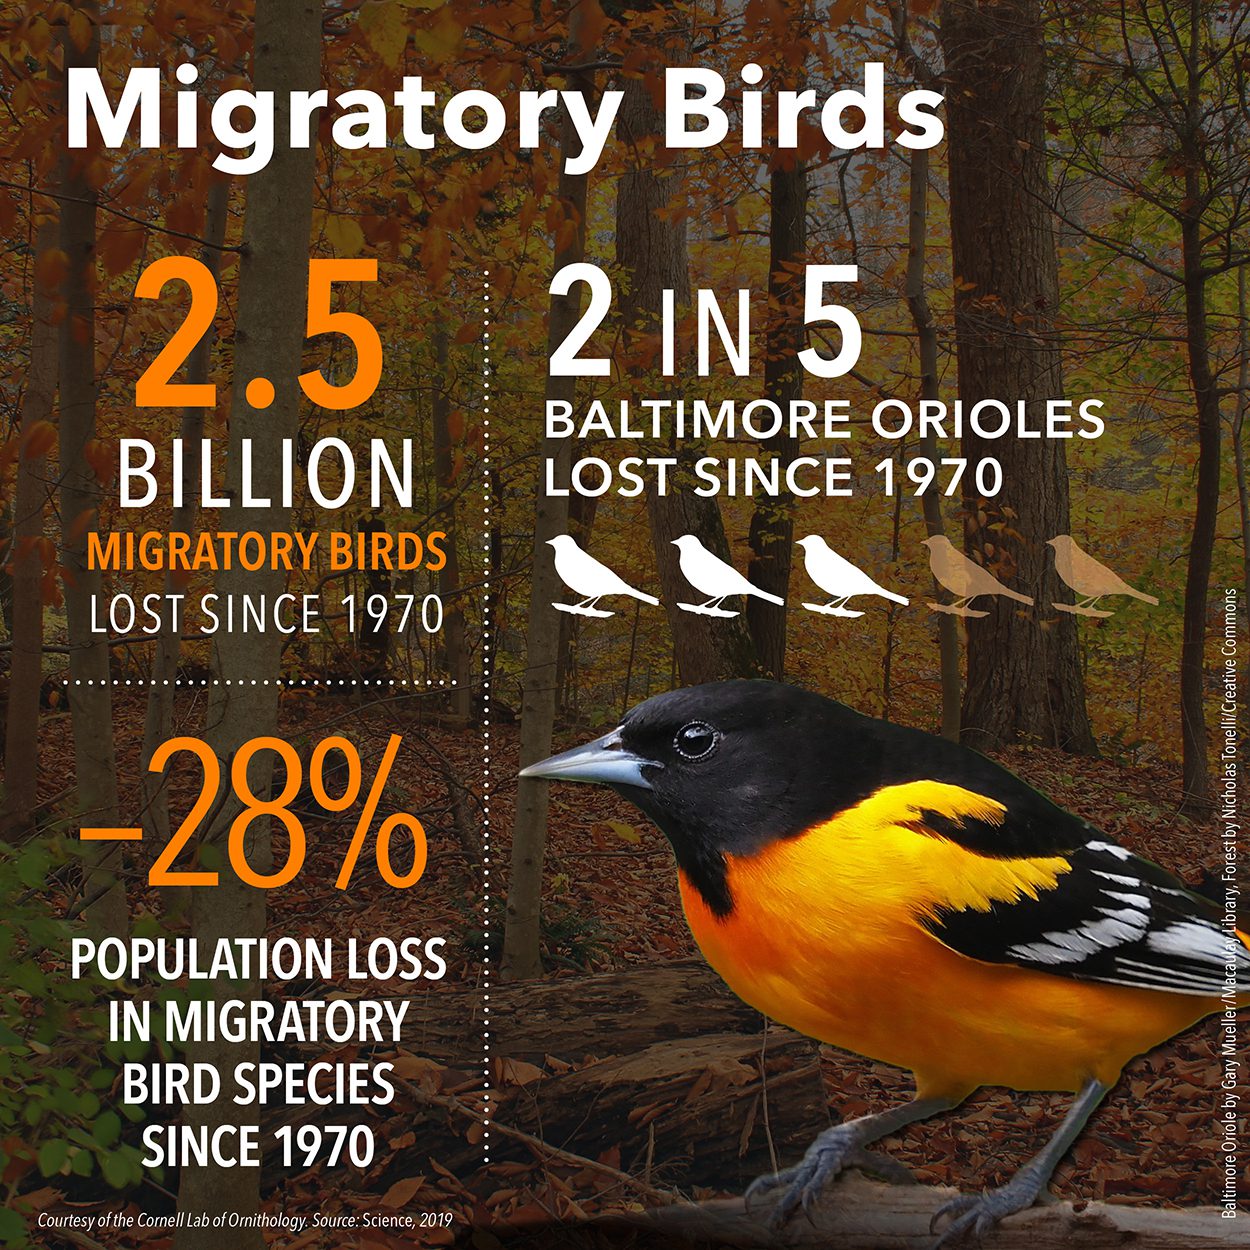 2.5 migratory birds lost since 1970; -28% population loss. 2 in 5 Baltimore Orioles lost since 1970.